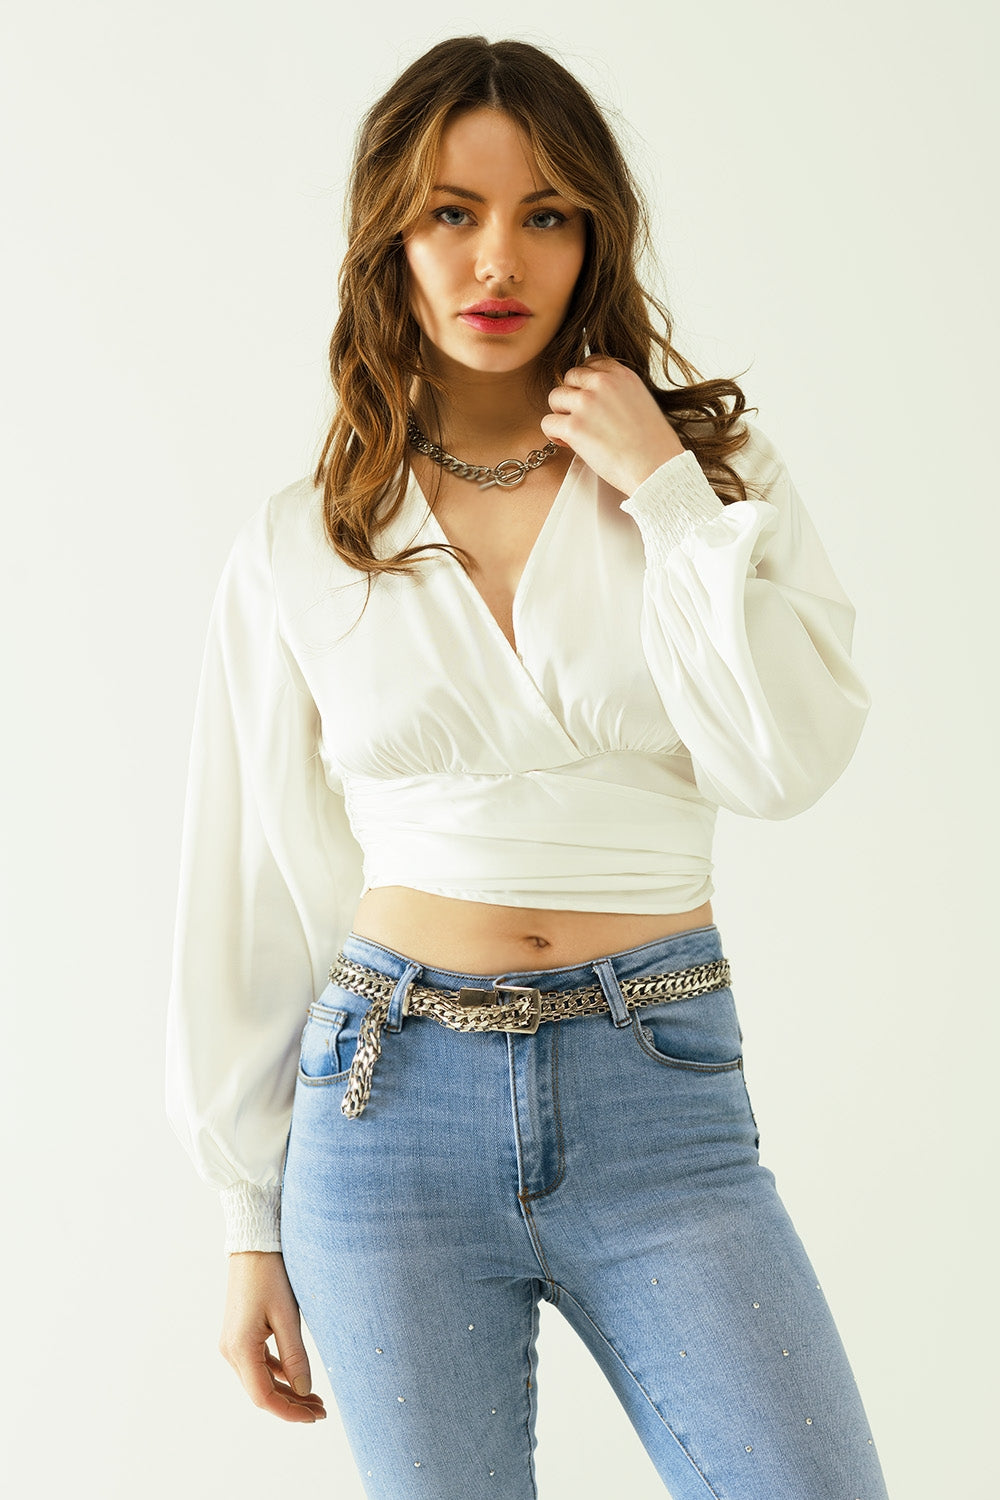 Q2 satin wrap crop top fitted at the waist in white